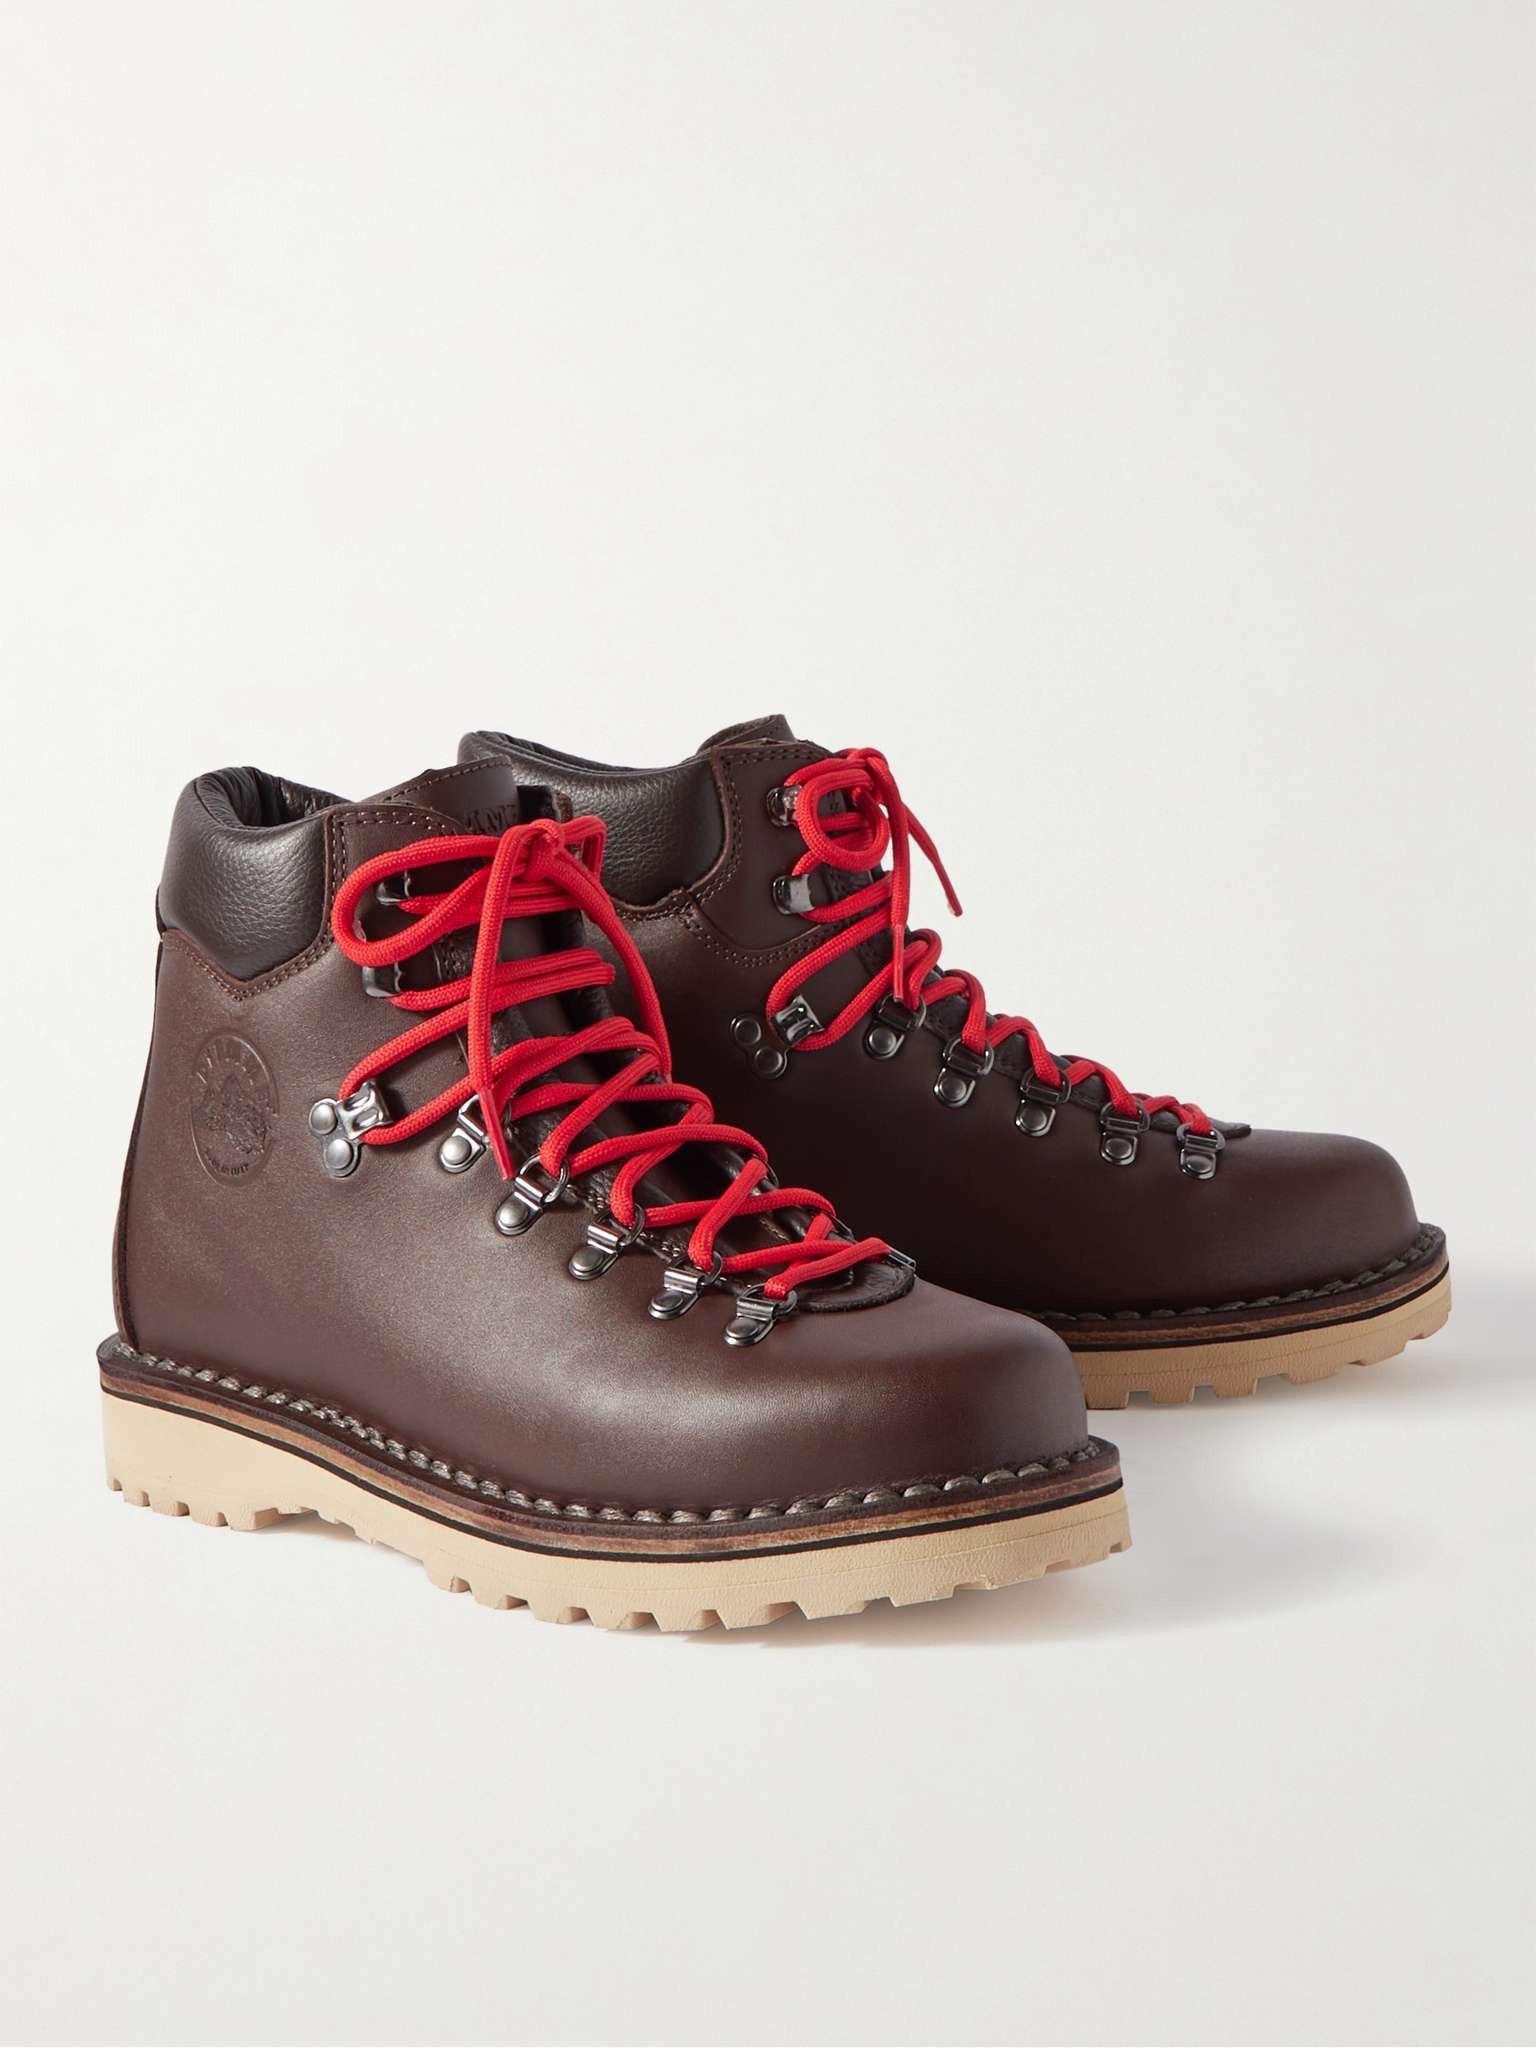 Roccia Vet Leather Hiking Boots - 4